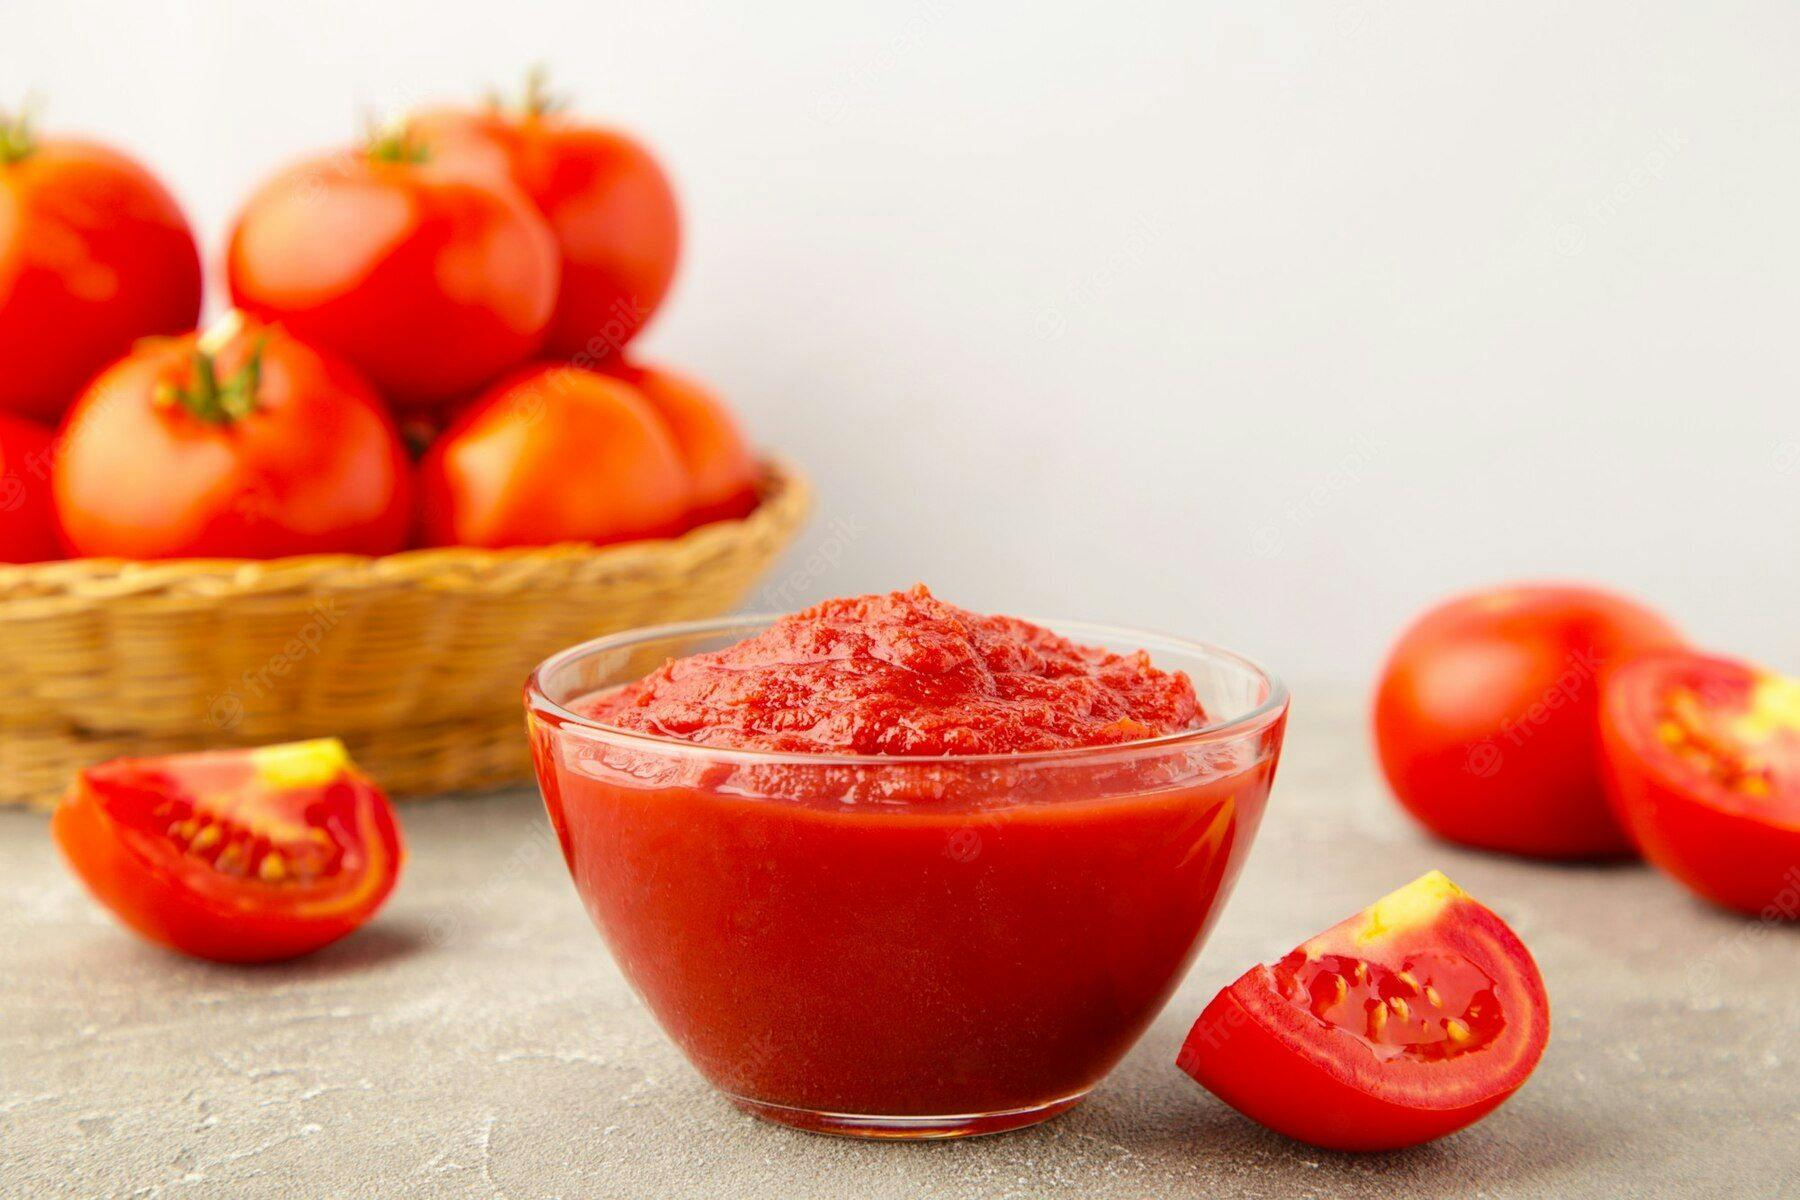 Tomato Ketchup Sauce Bowl with Tomatoes 106006 3568 Min